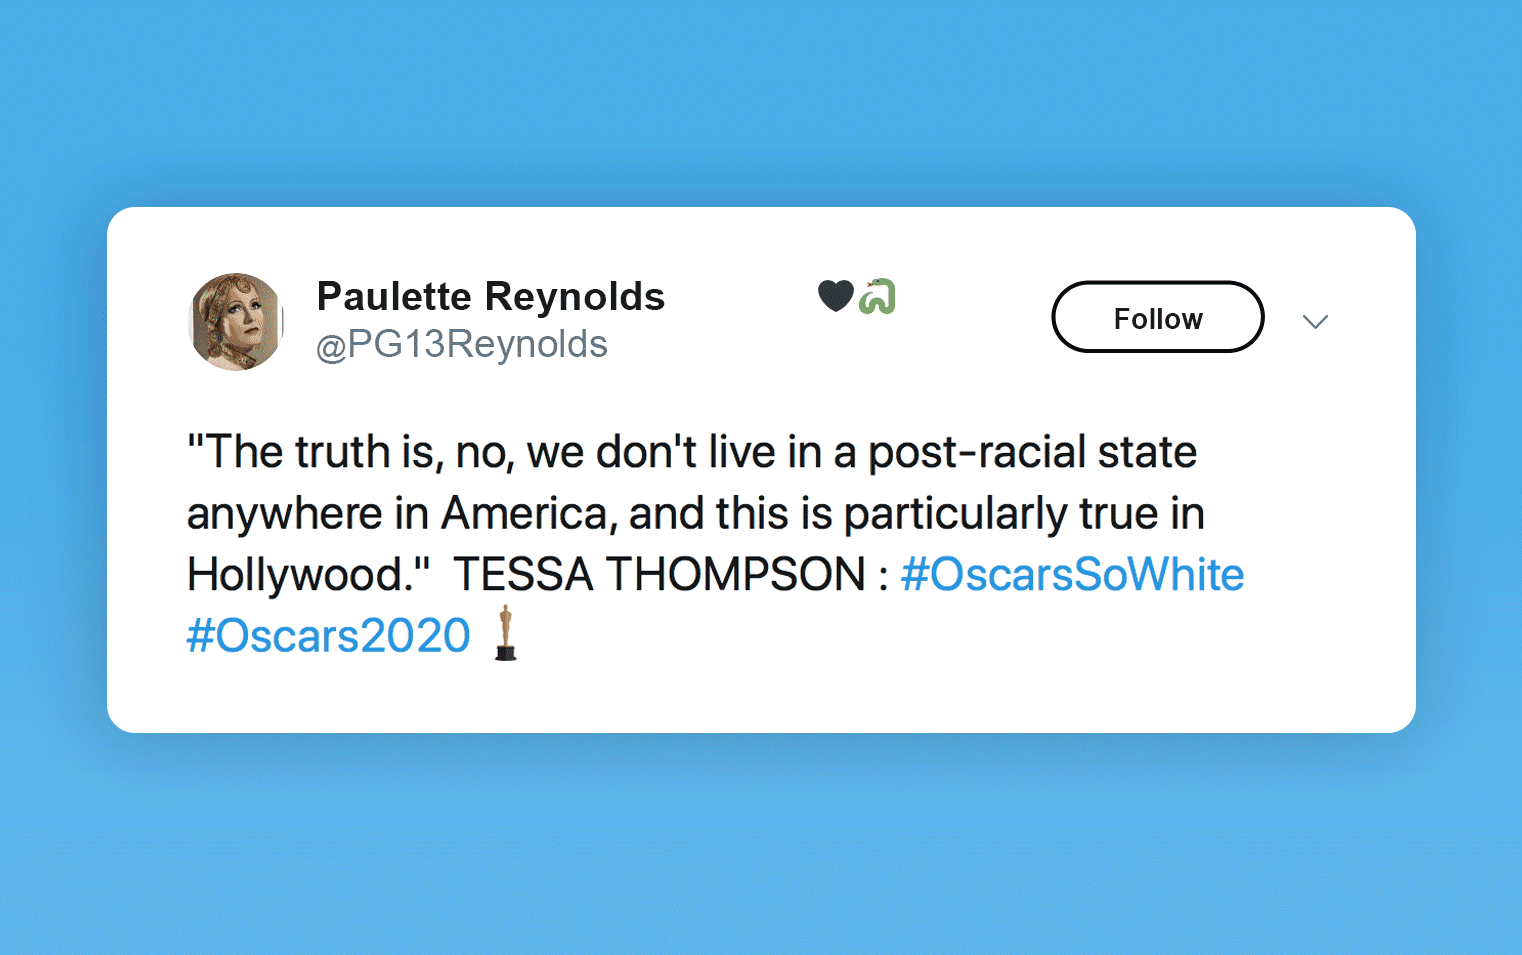 A selection of tweets featuring the #OscarsSoWhite hashtag